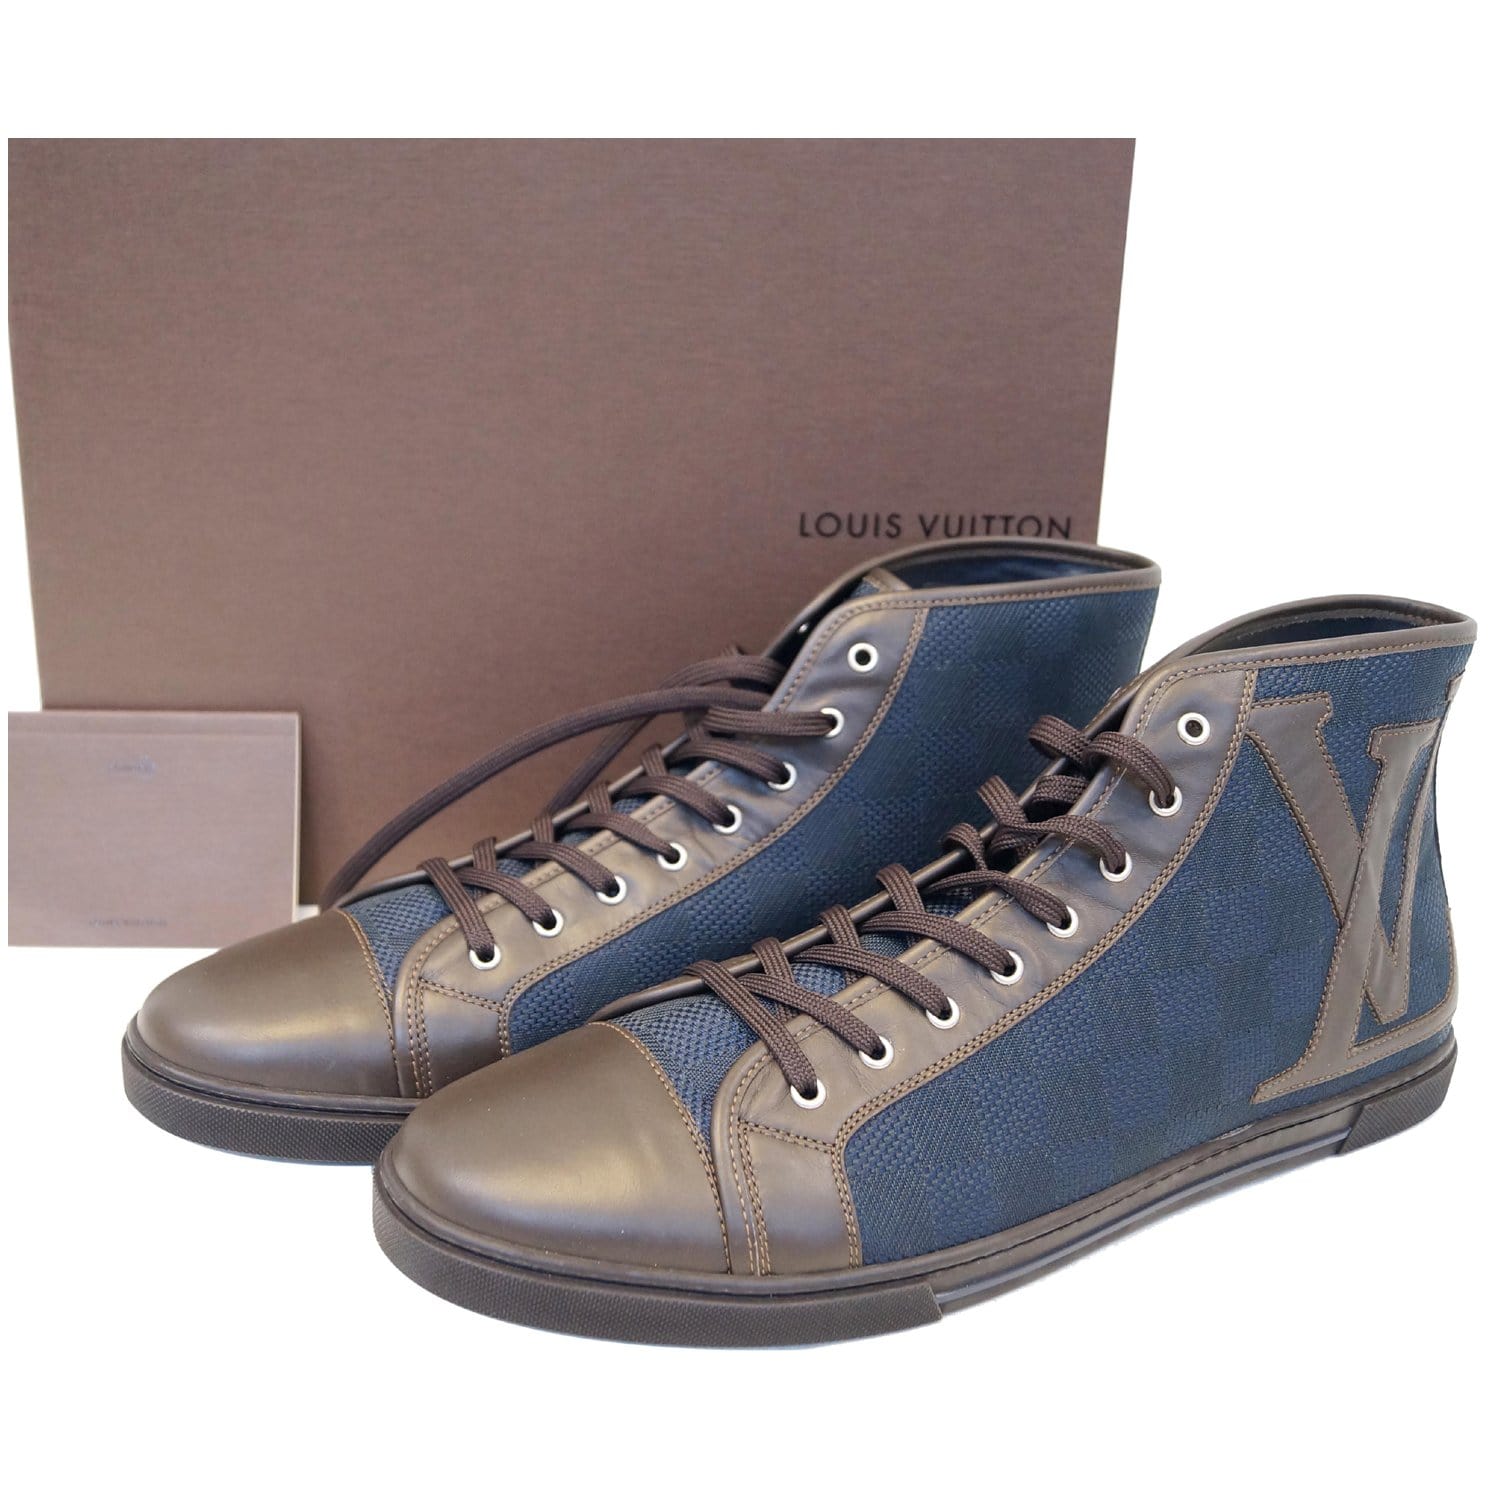 Authentic LOUIS VUITTON 'Upside Down” HIGH-TOP SNEAKERS Size 8 LV, 9 US